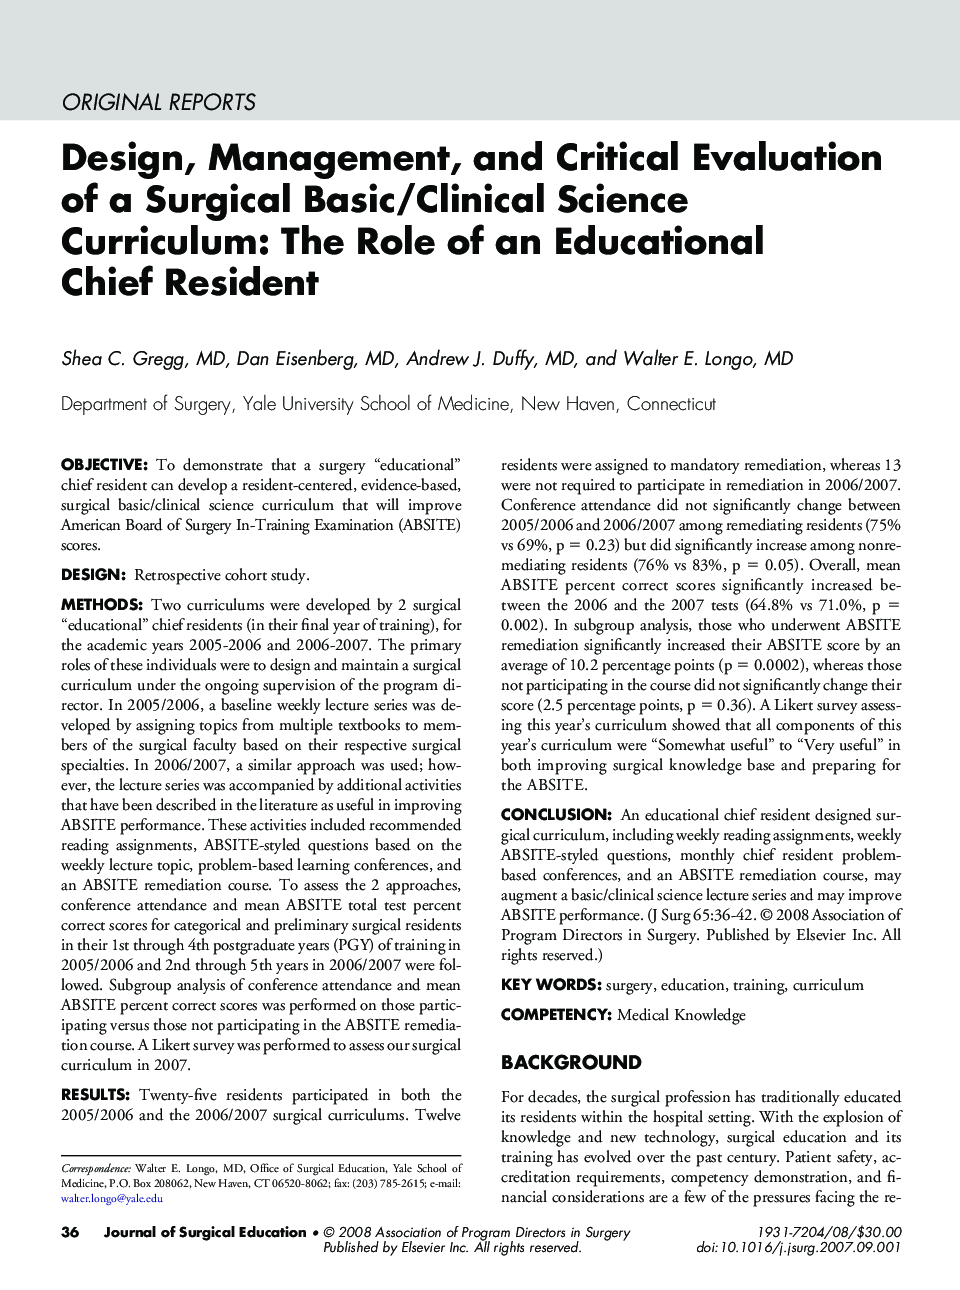 Design, Management, and Critical Evaluation of a Surgical Basic/Clinical Science Curriculum: The Role of an Educational Chief Resident